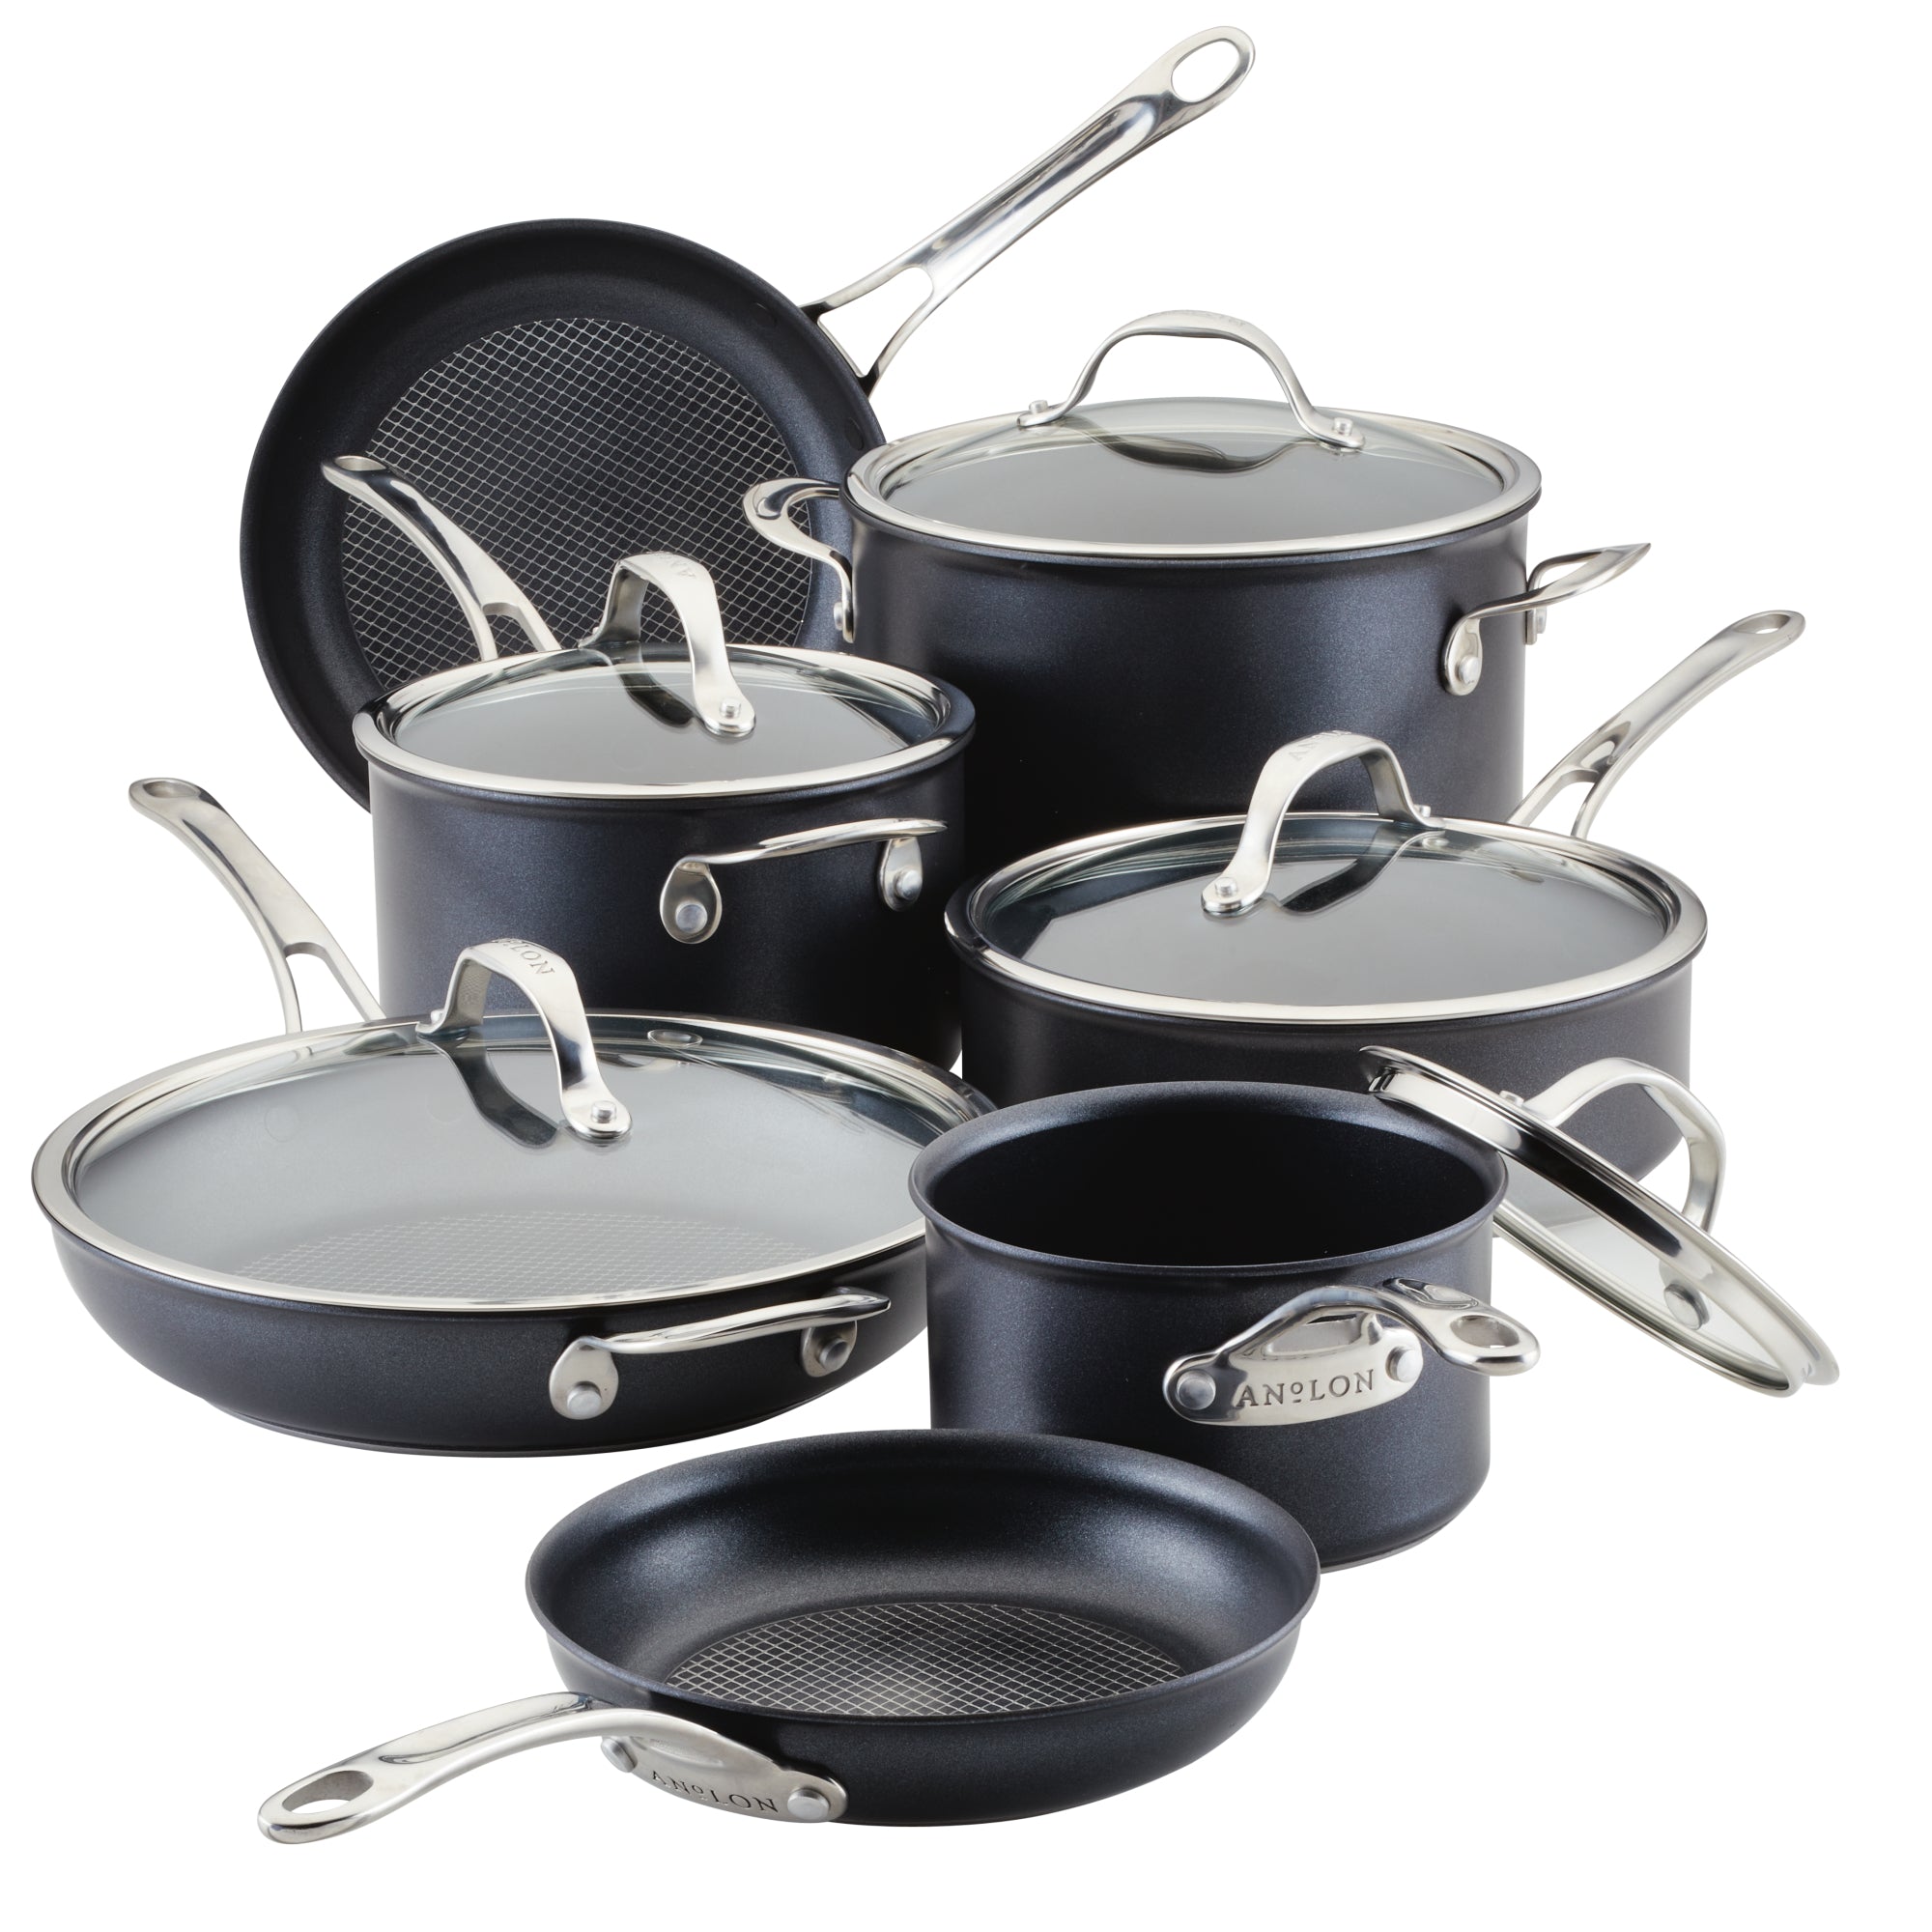 Mother's Day Instant Savings | Save on select cookware & bakeware!